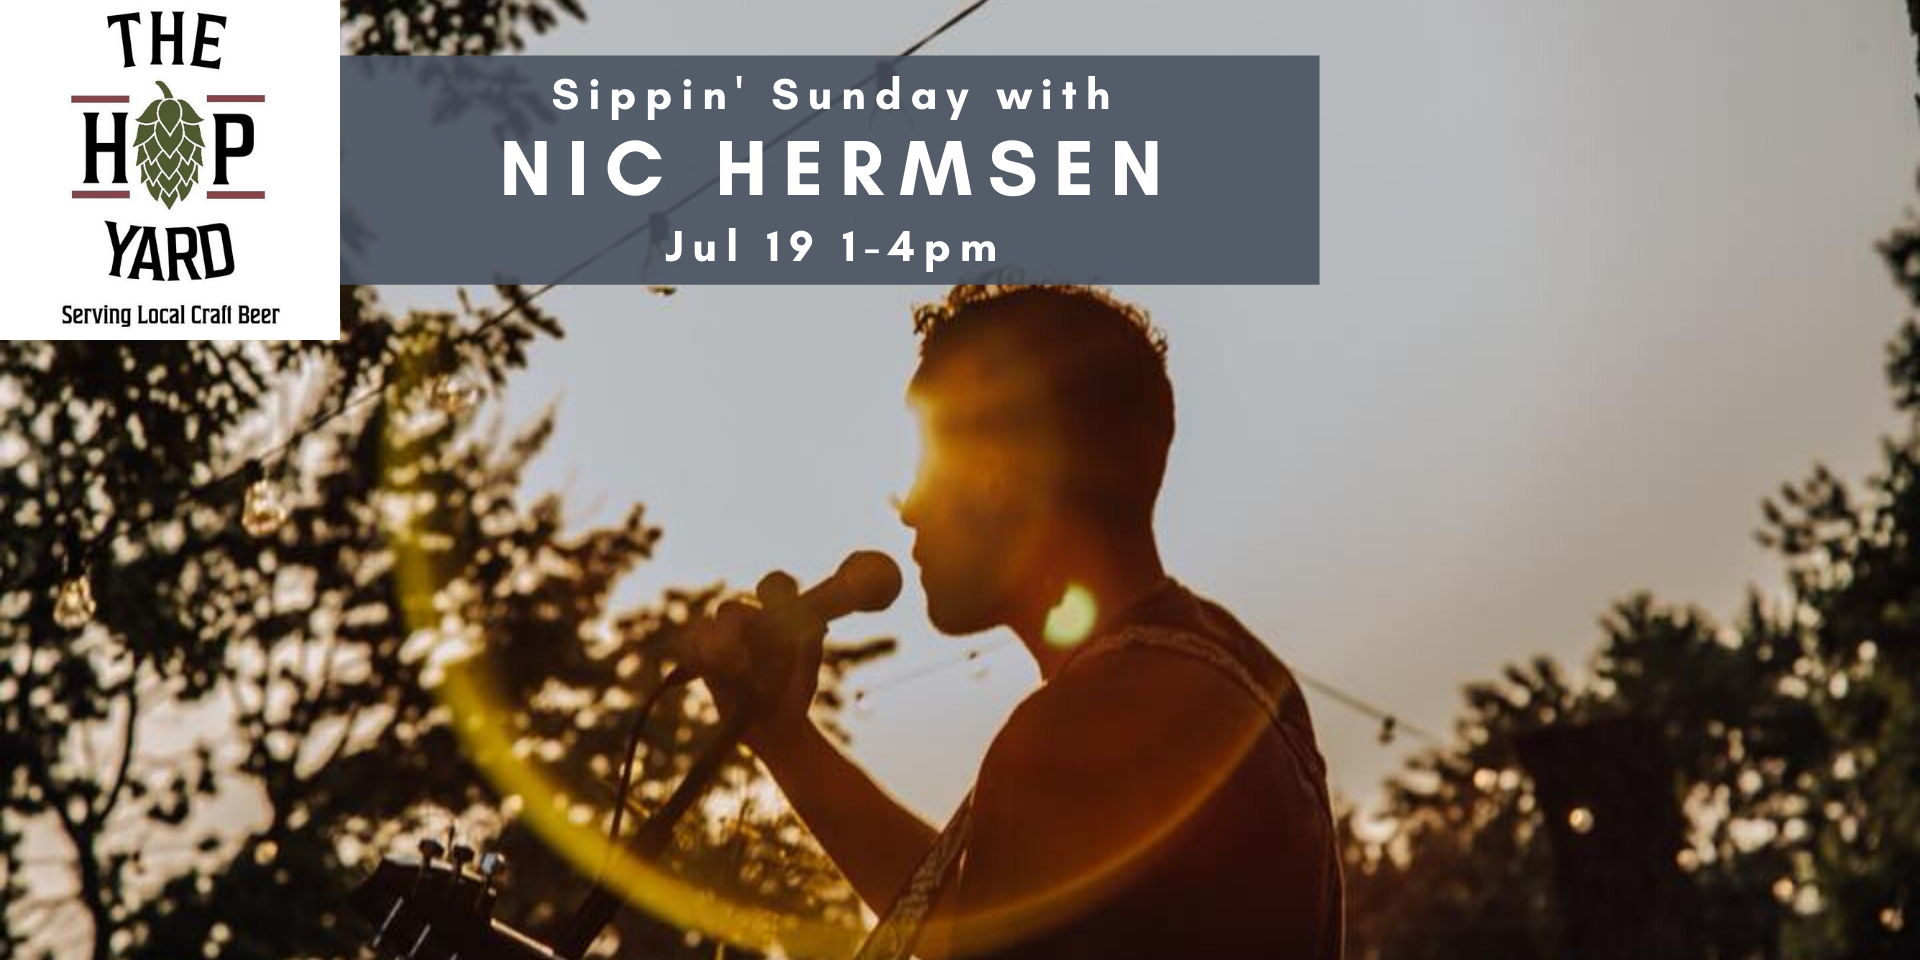 Sippin' Sunday at The Hop Yard featuring Nic Hermsen promotional image